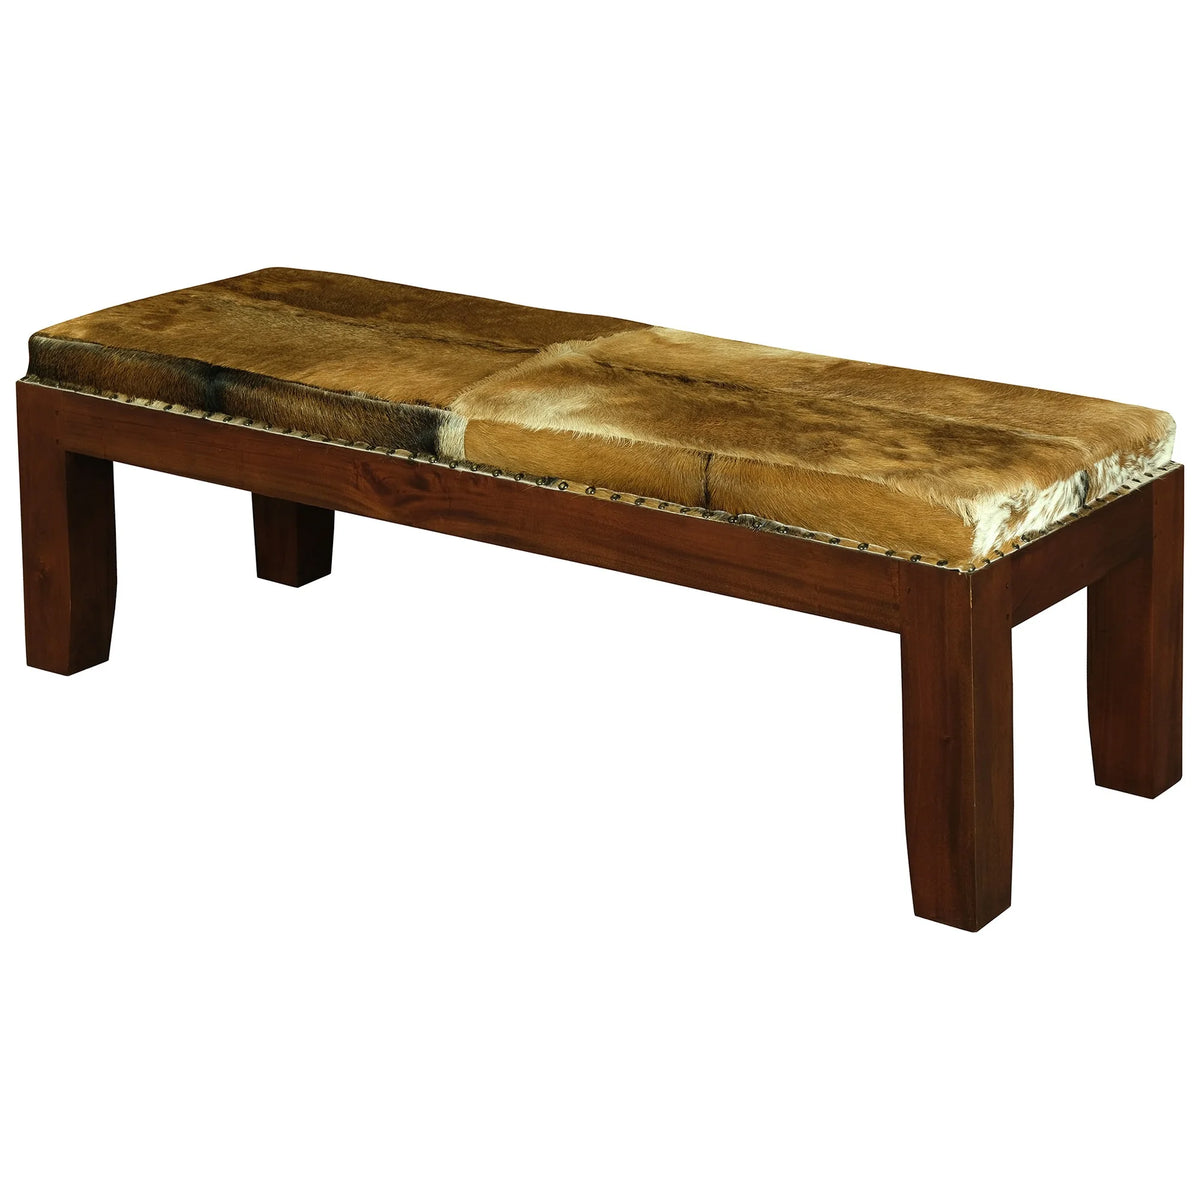 Zocca Solid Timber Double Bench with Goat Hide Seat - Notbrand